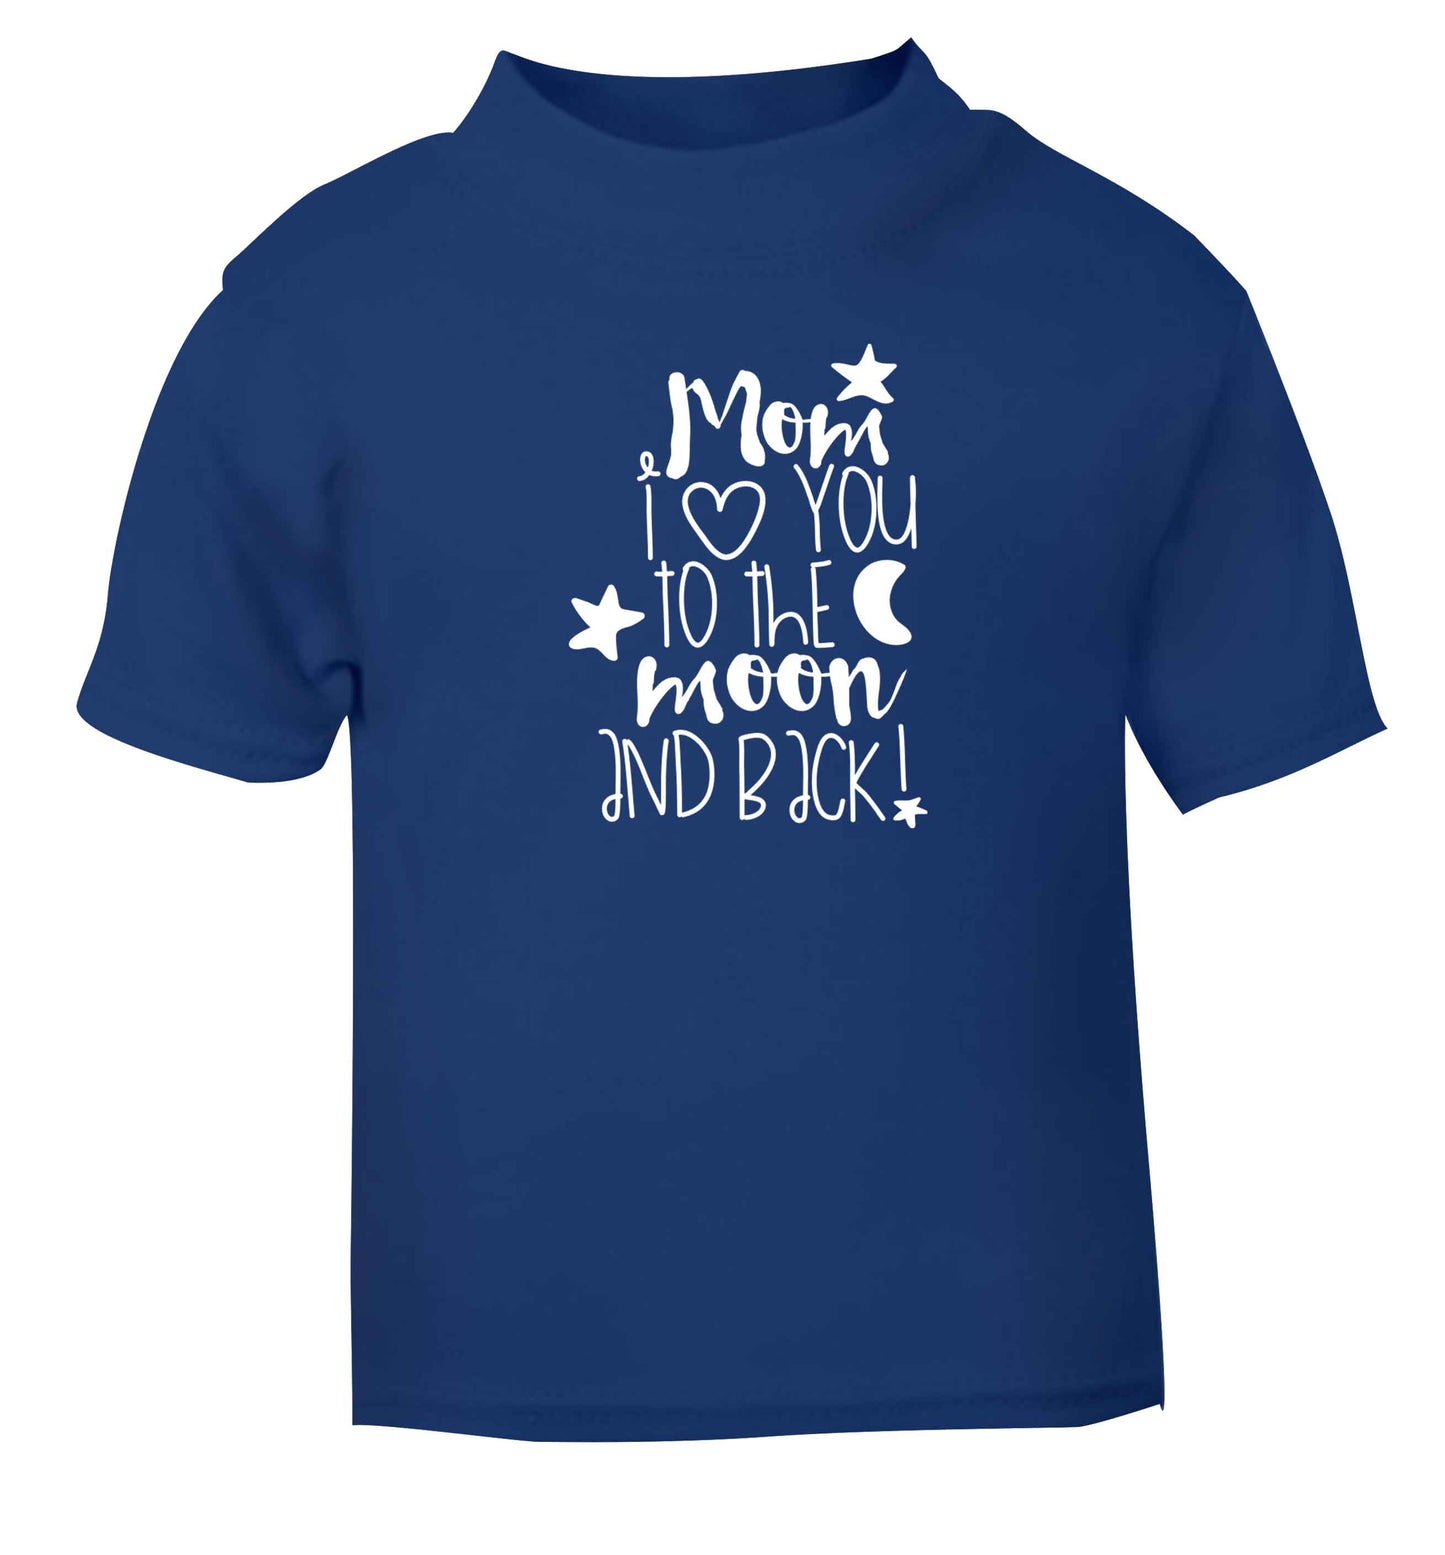 Mom I love you to the moon and back blue baby toddler Tshirt 2 Years